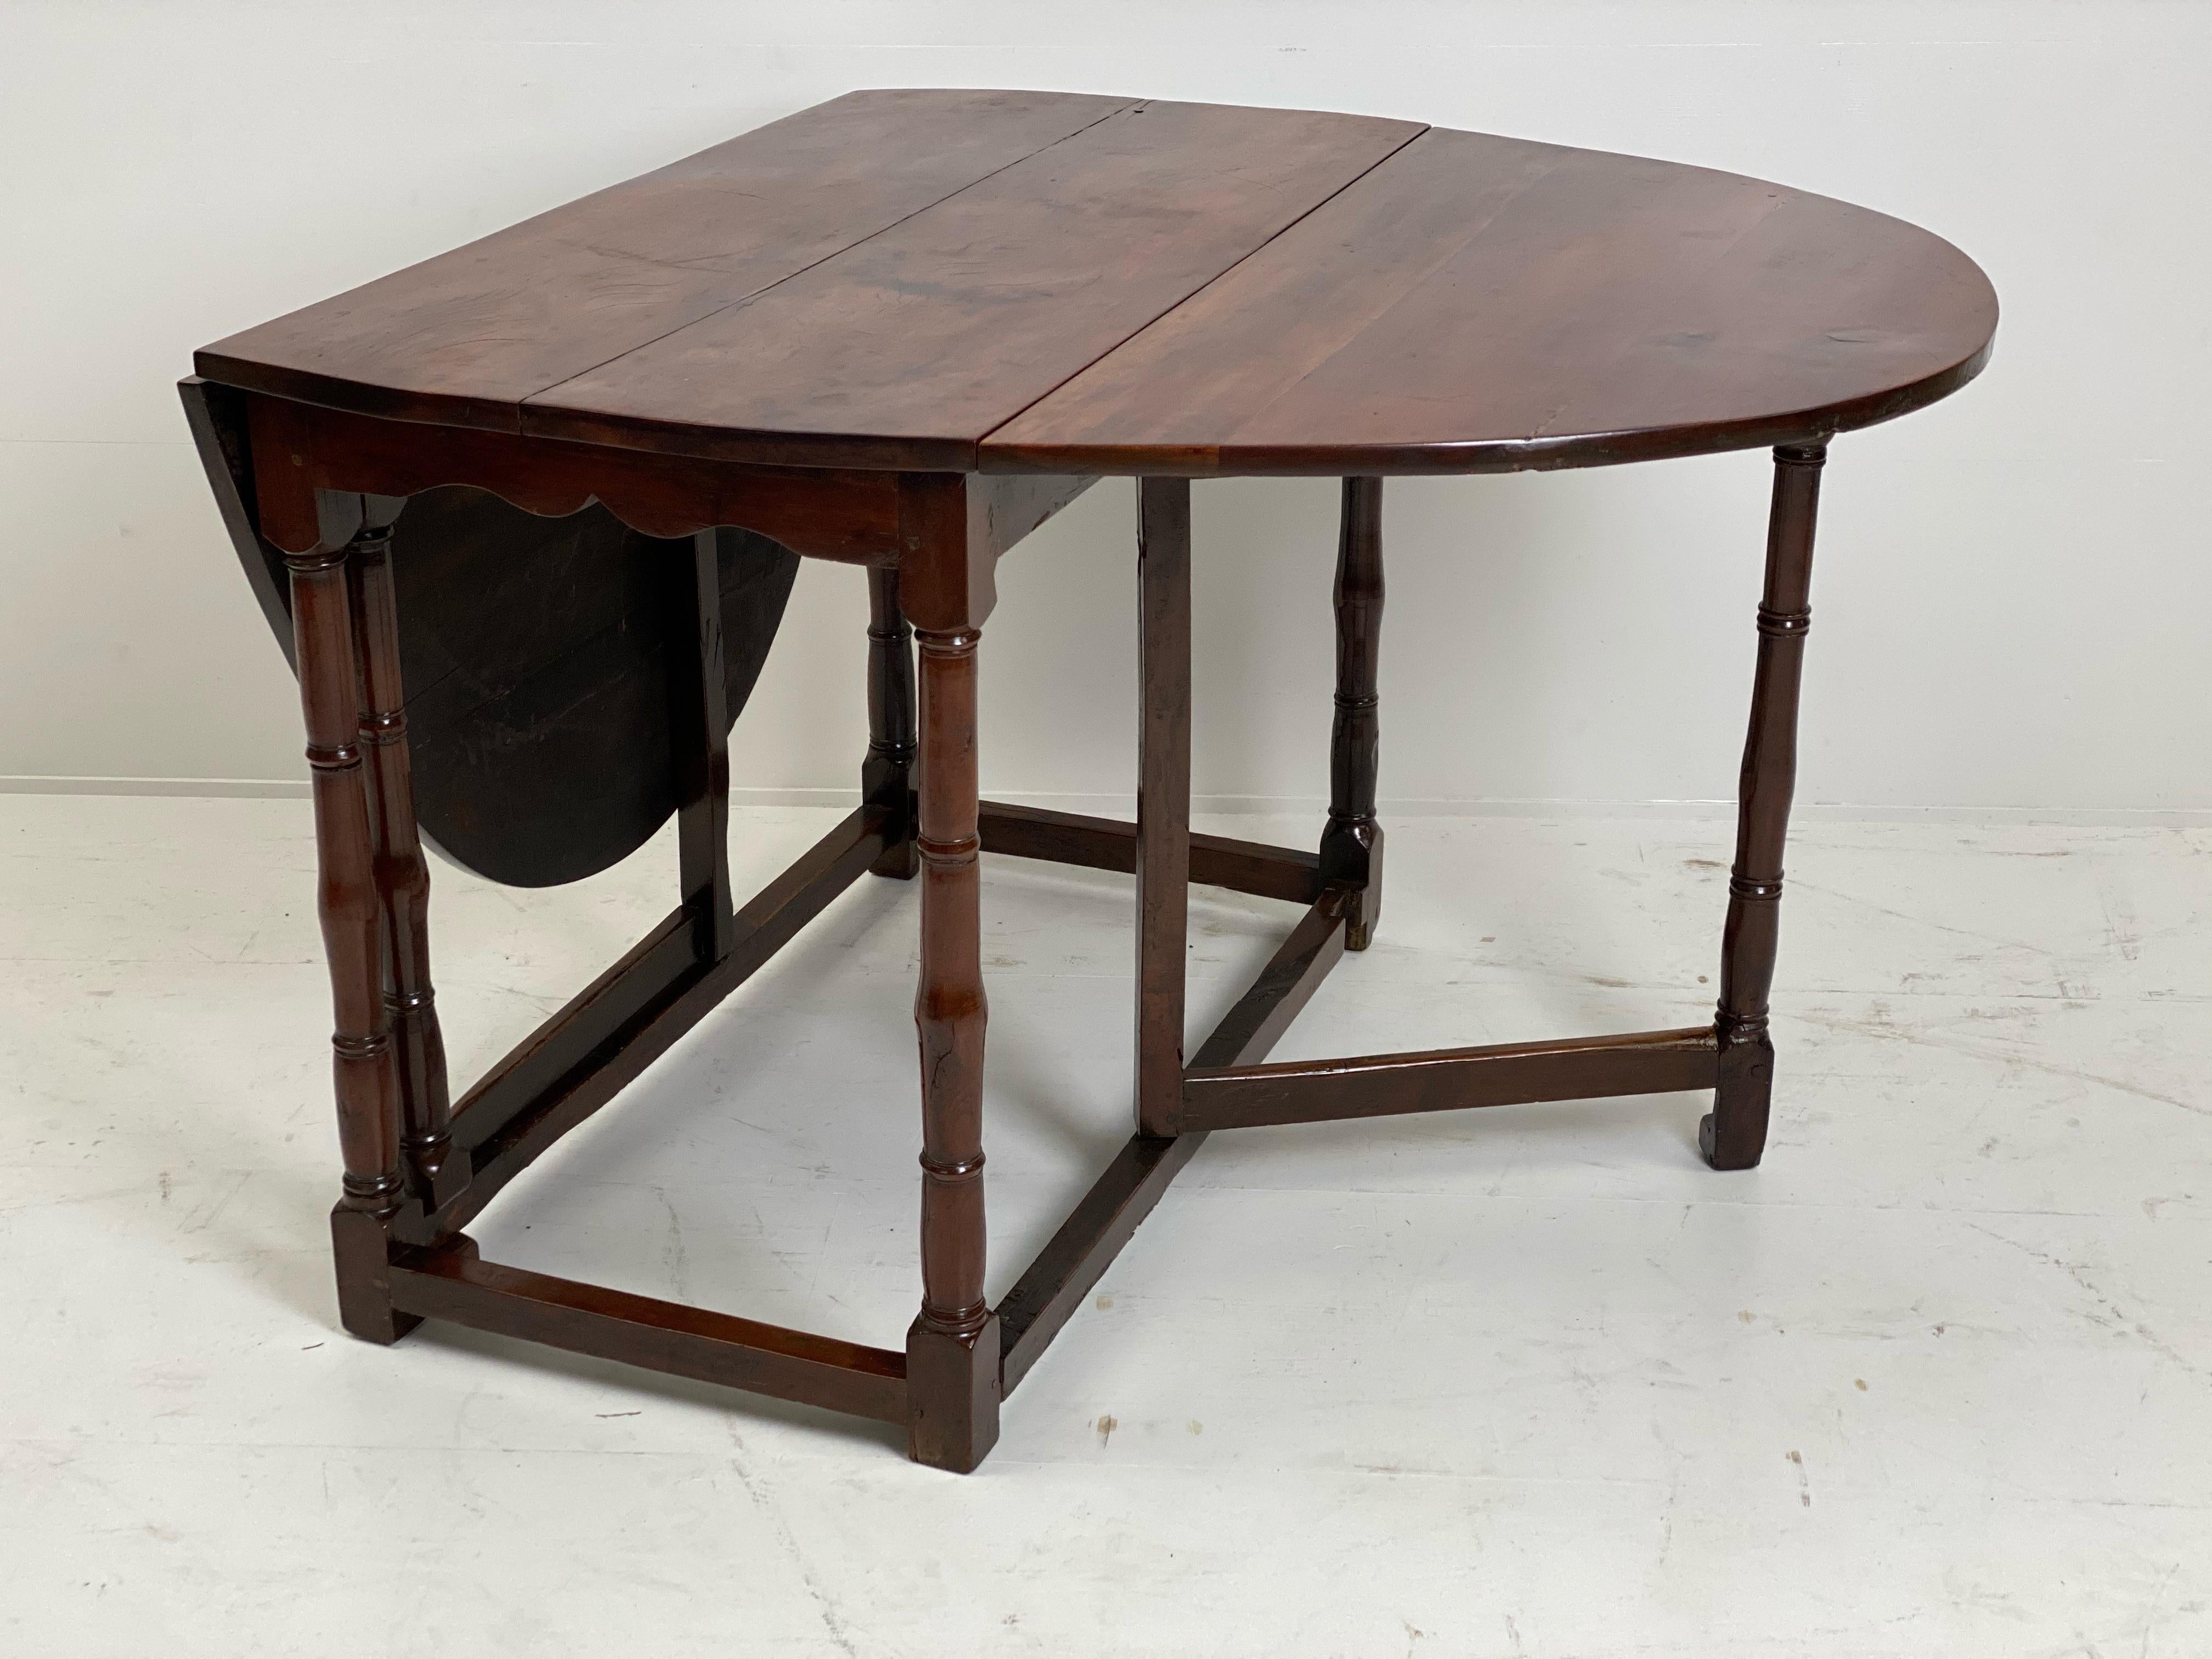 Exceptional English Antique Gatelag Table in Yew Wood, 18 th Century For Sale 2